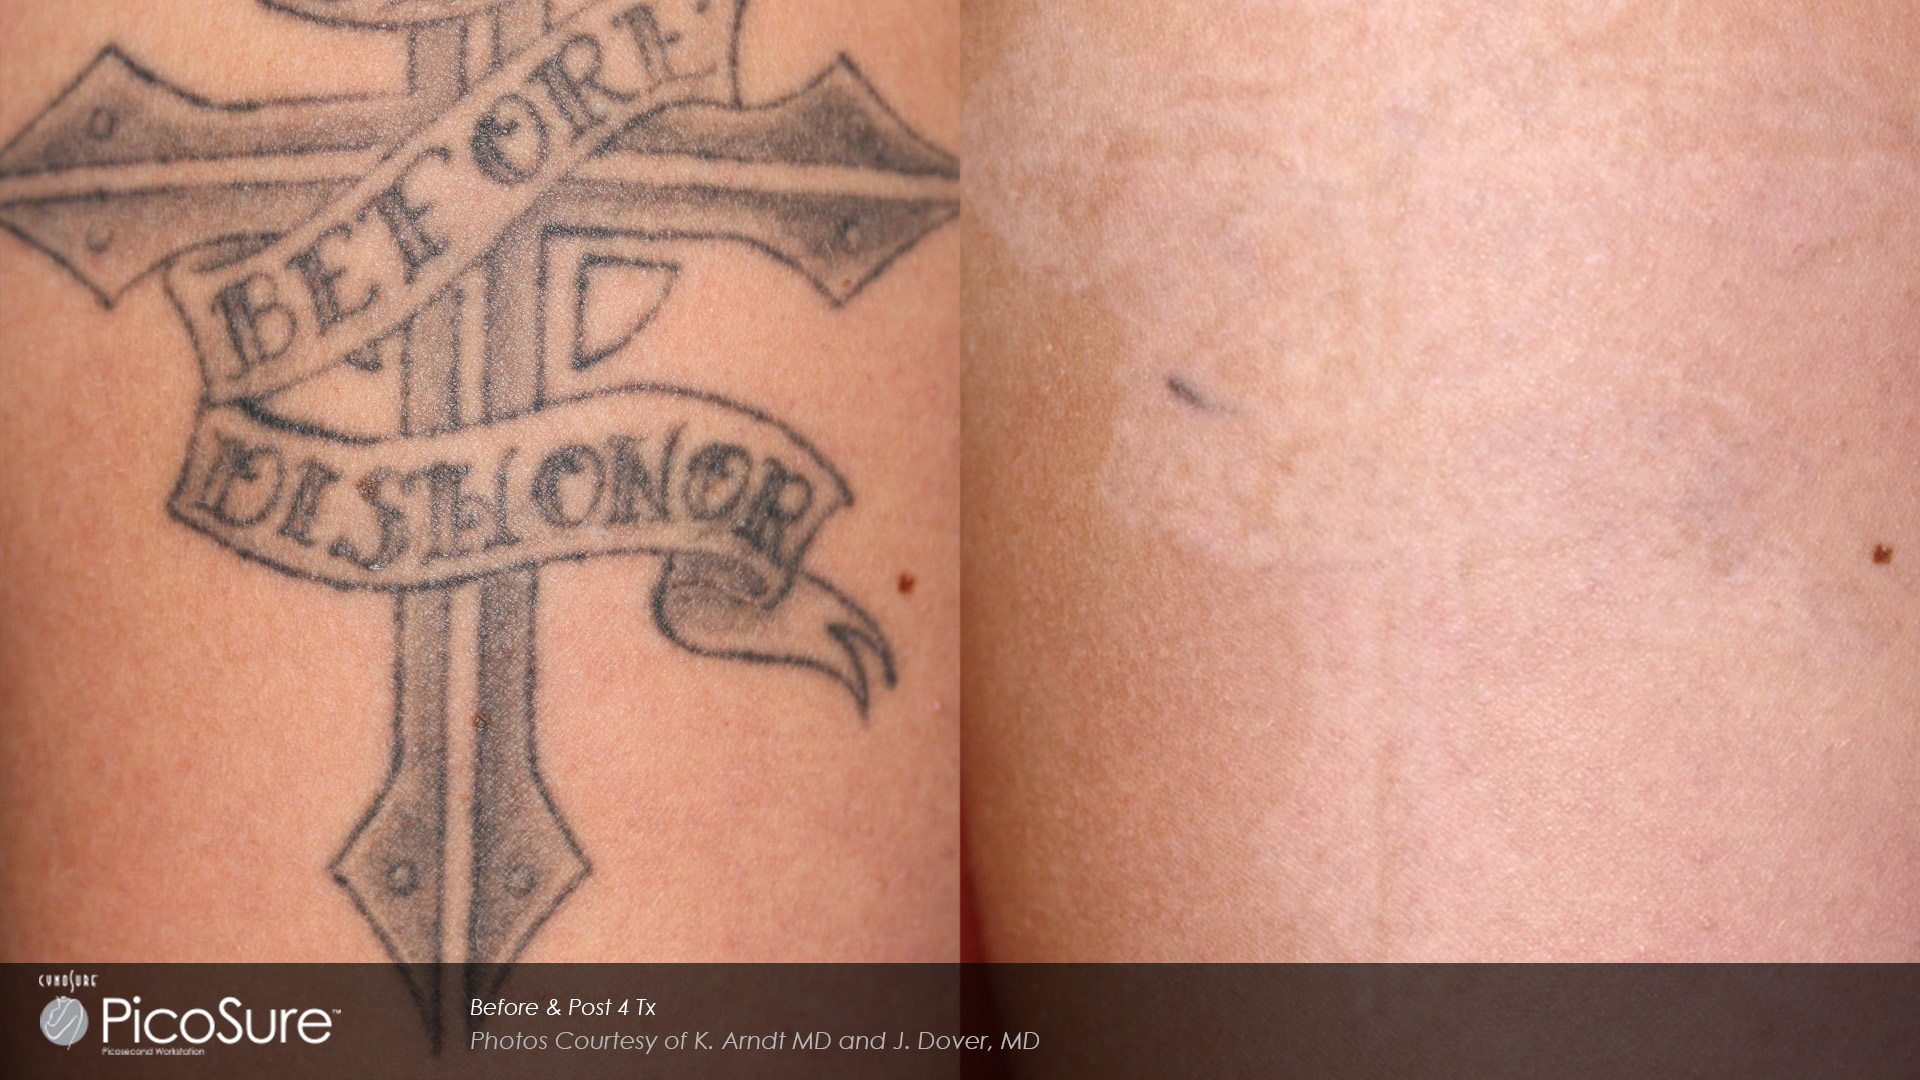 ... tattoo removal Picosure. Location: Raleigh - Durham - Fayetteville